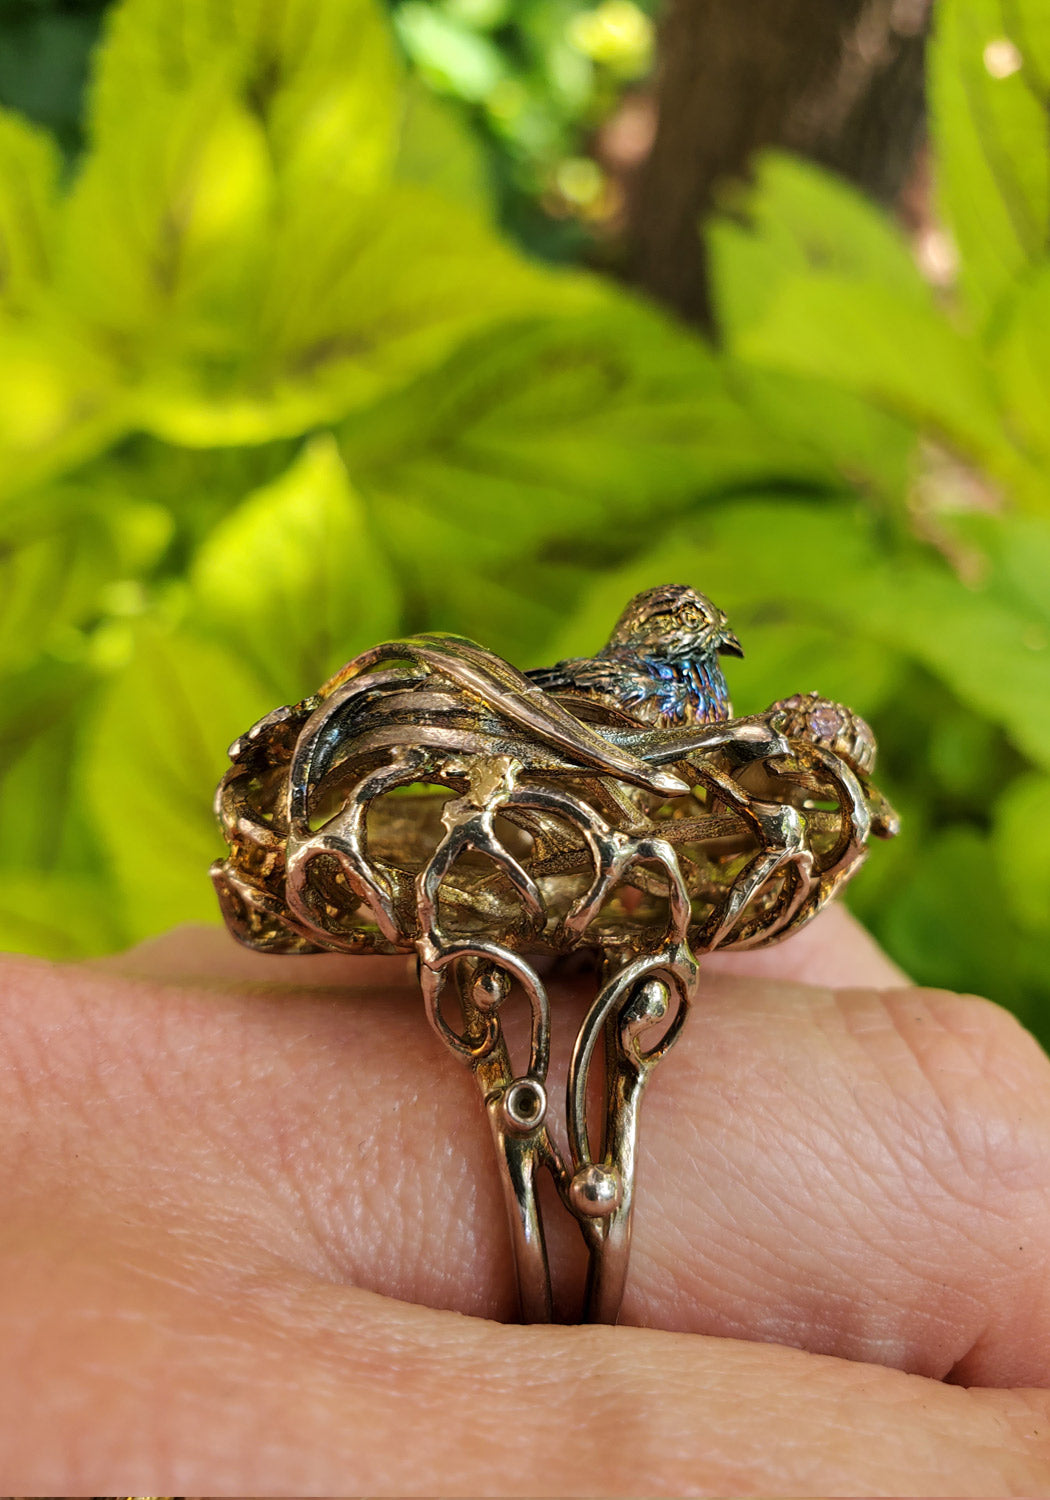 Vernissage Burnished Silver Sapphire Happy Bird Nest Ring | OsterJewelers.com